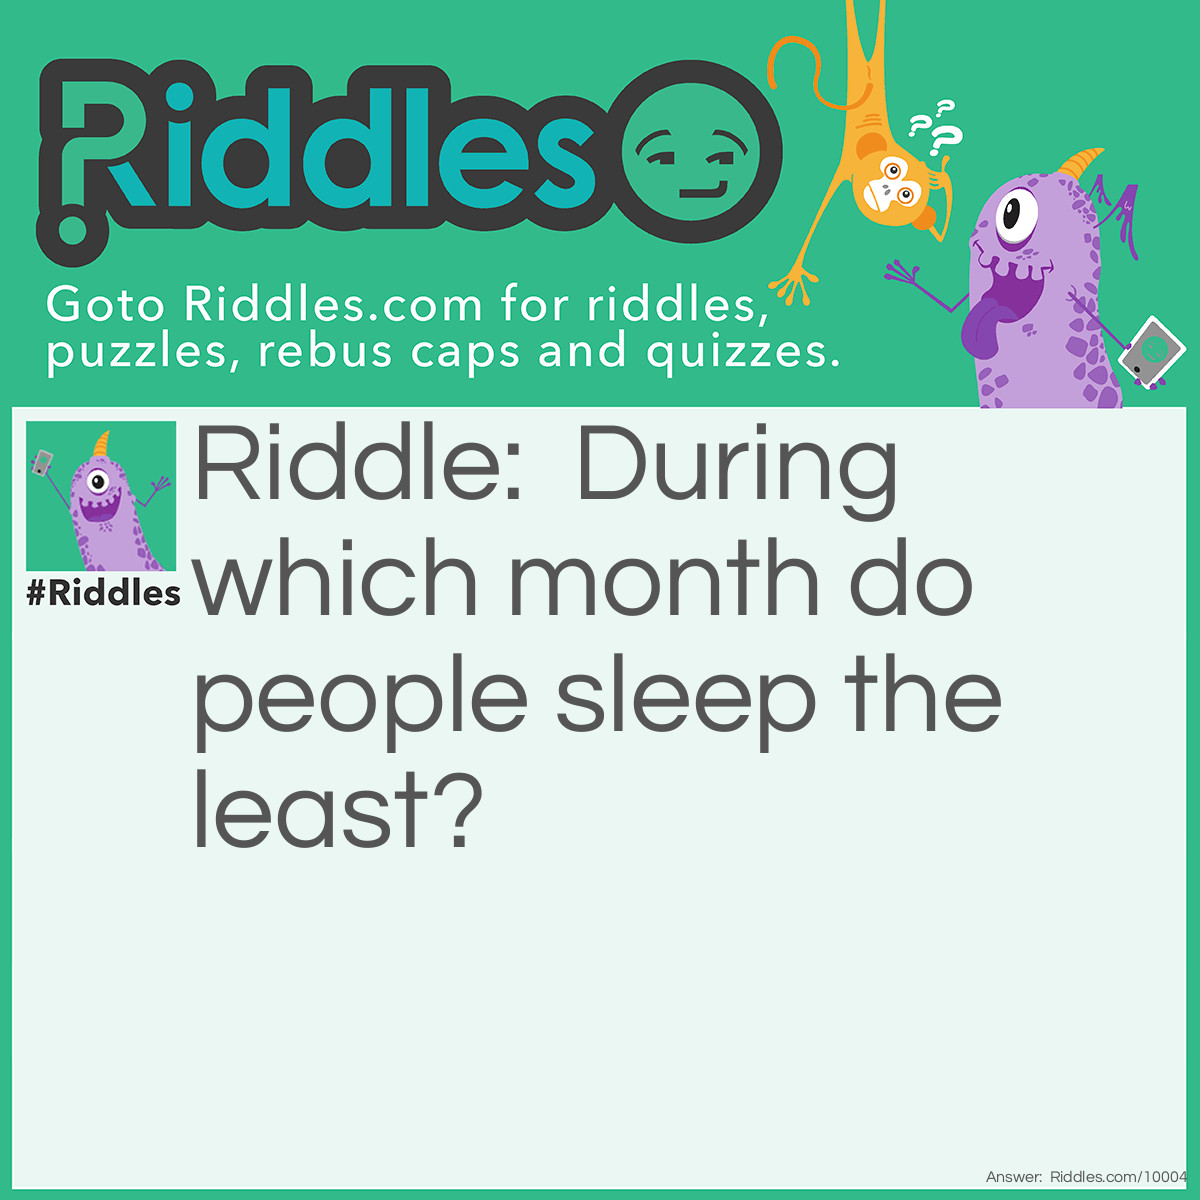 Riddle: During which month do people sleep the least? Answer: February, of course! It has a maximum of 29 days.